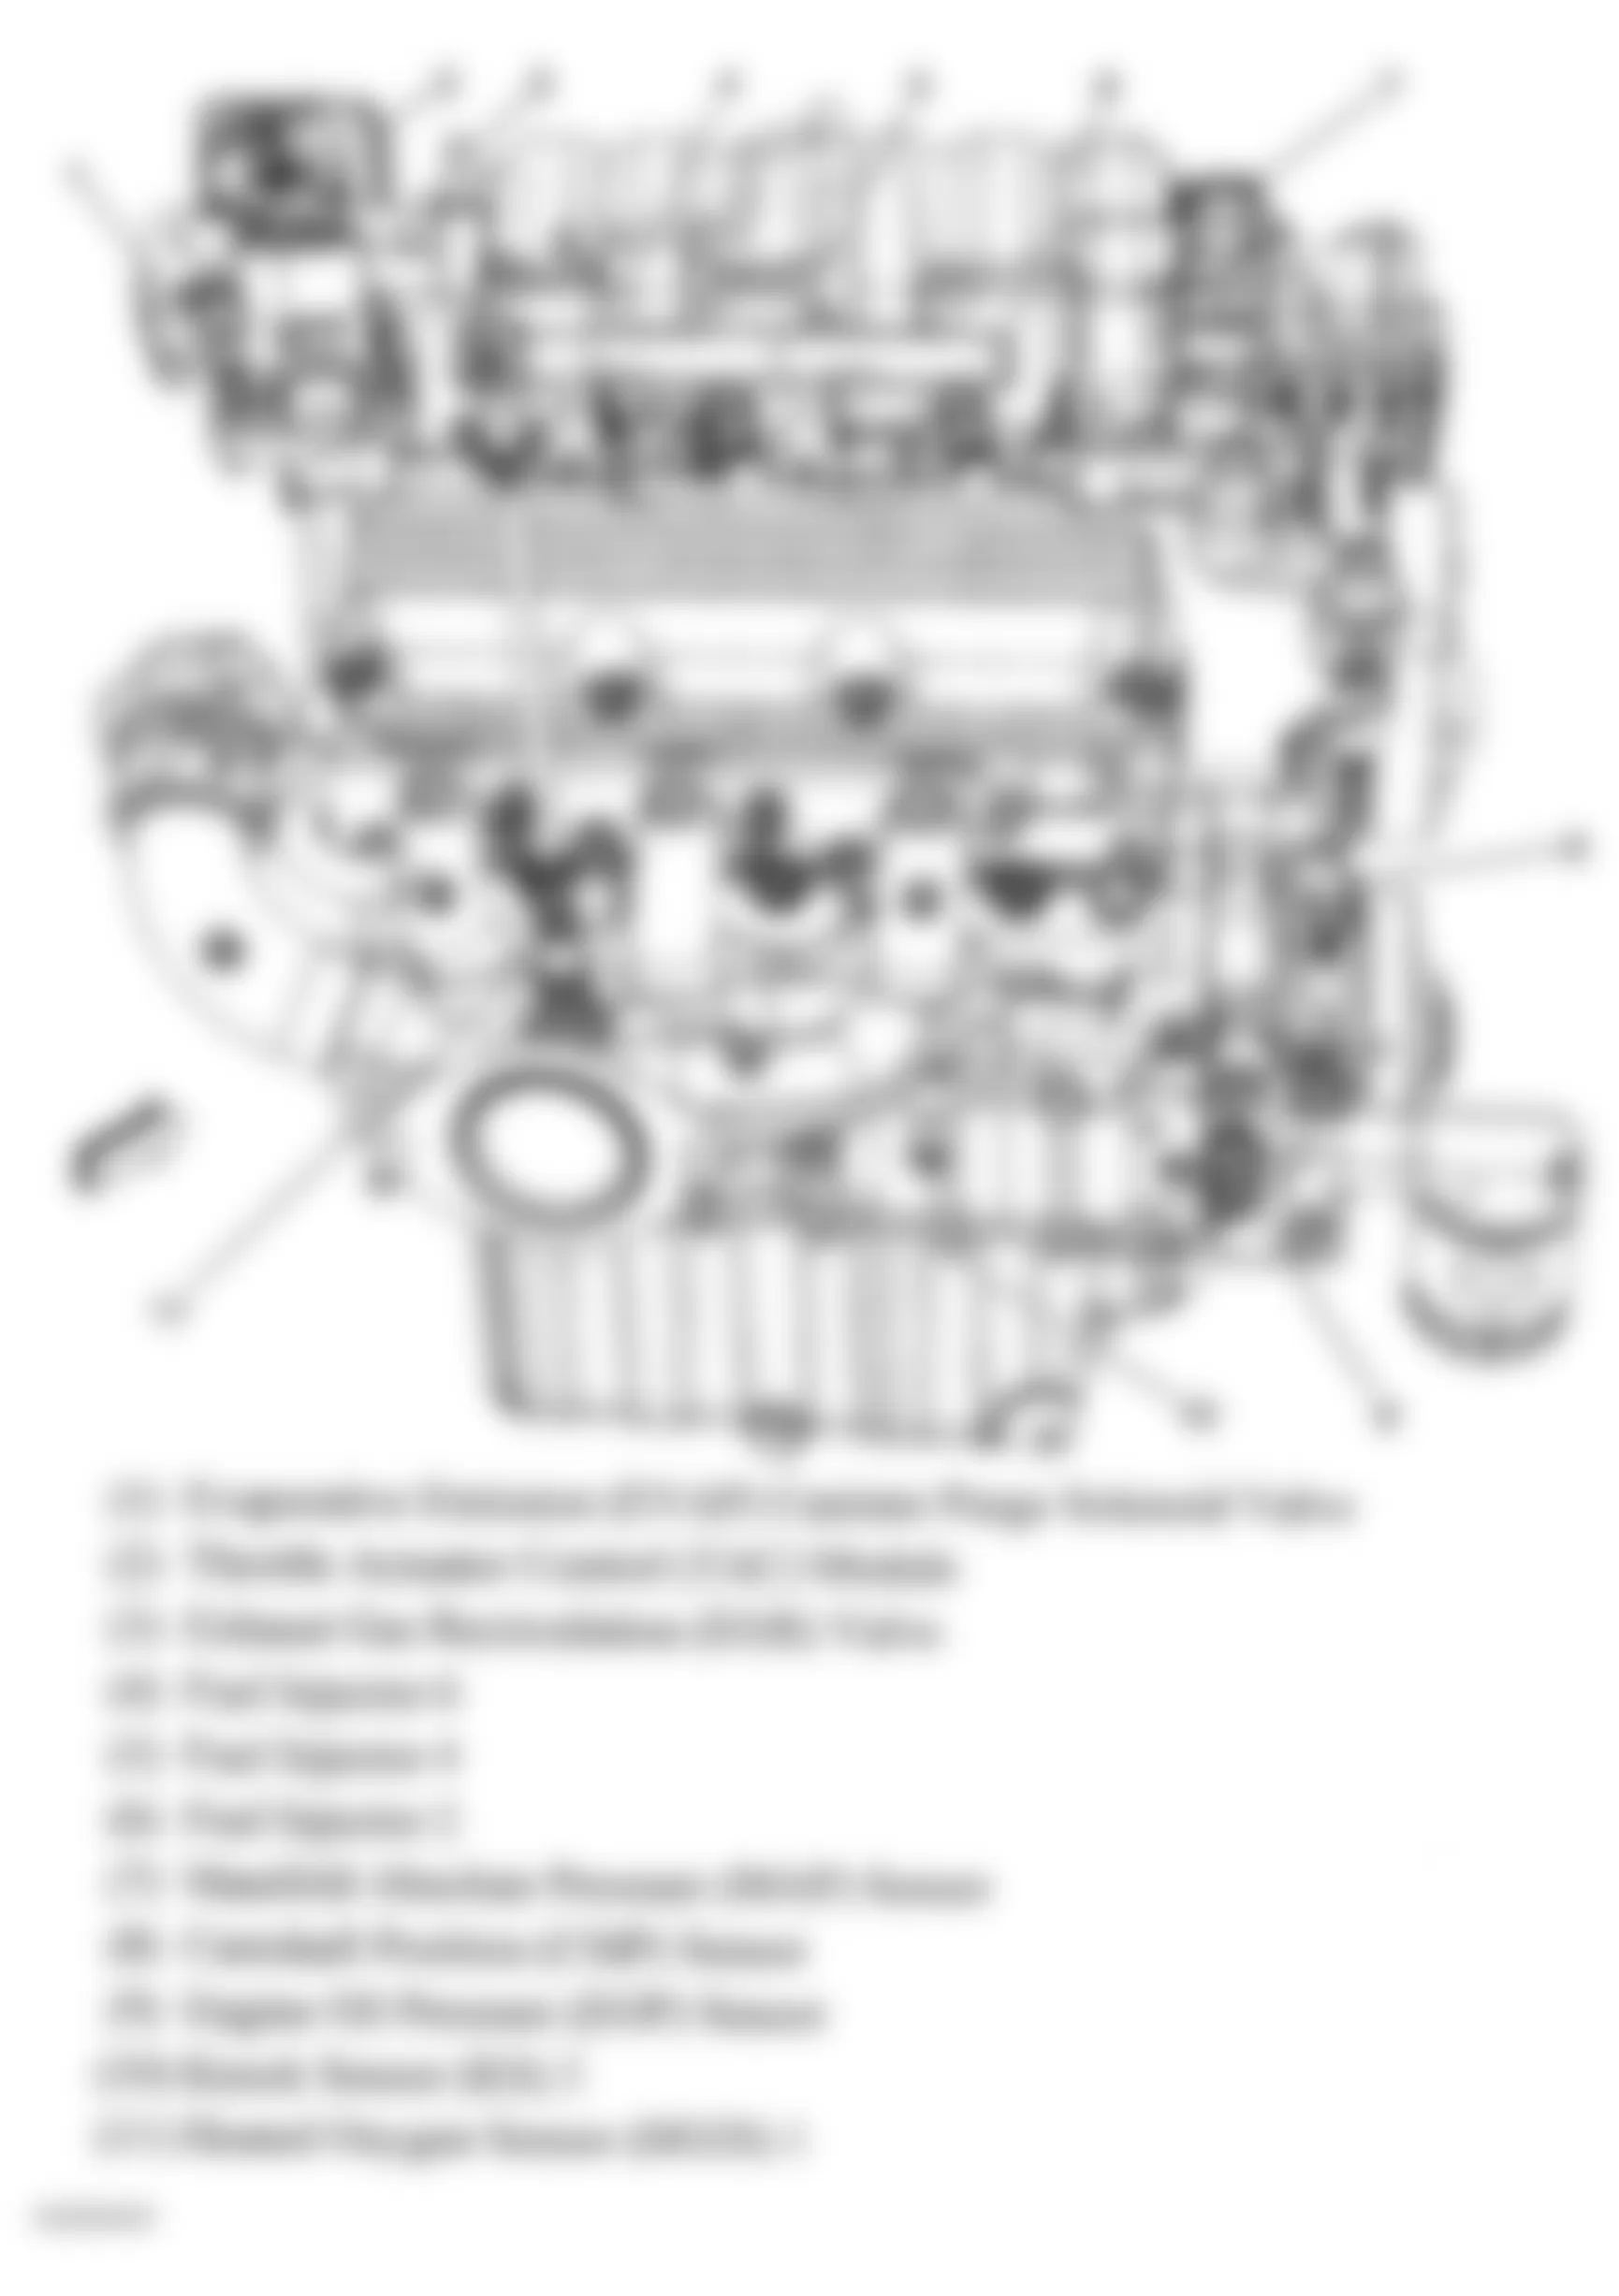 Buick Allure CXL 2006 - Component Locations -  Right Side Of Engine (3.8L)